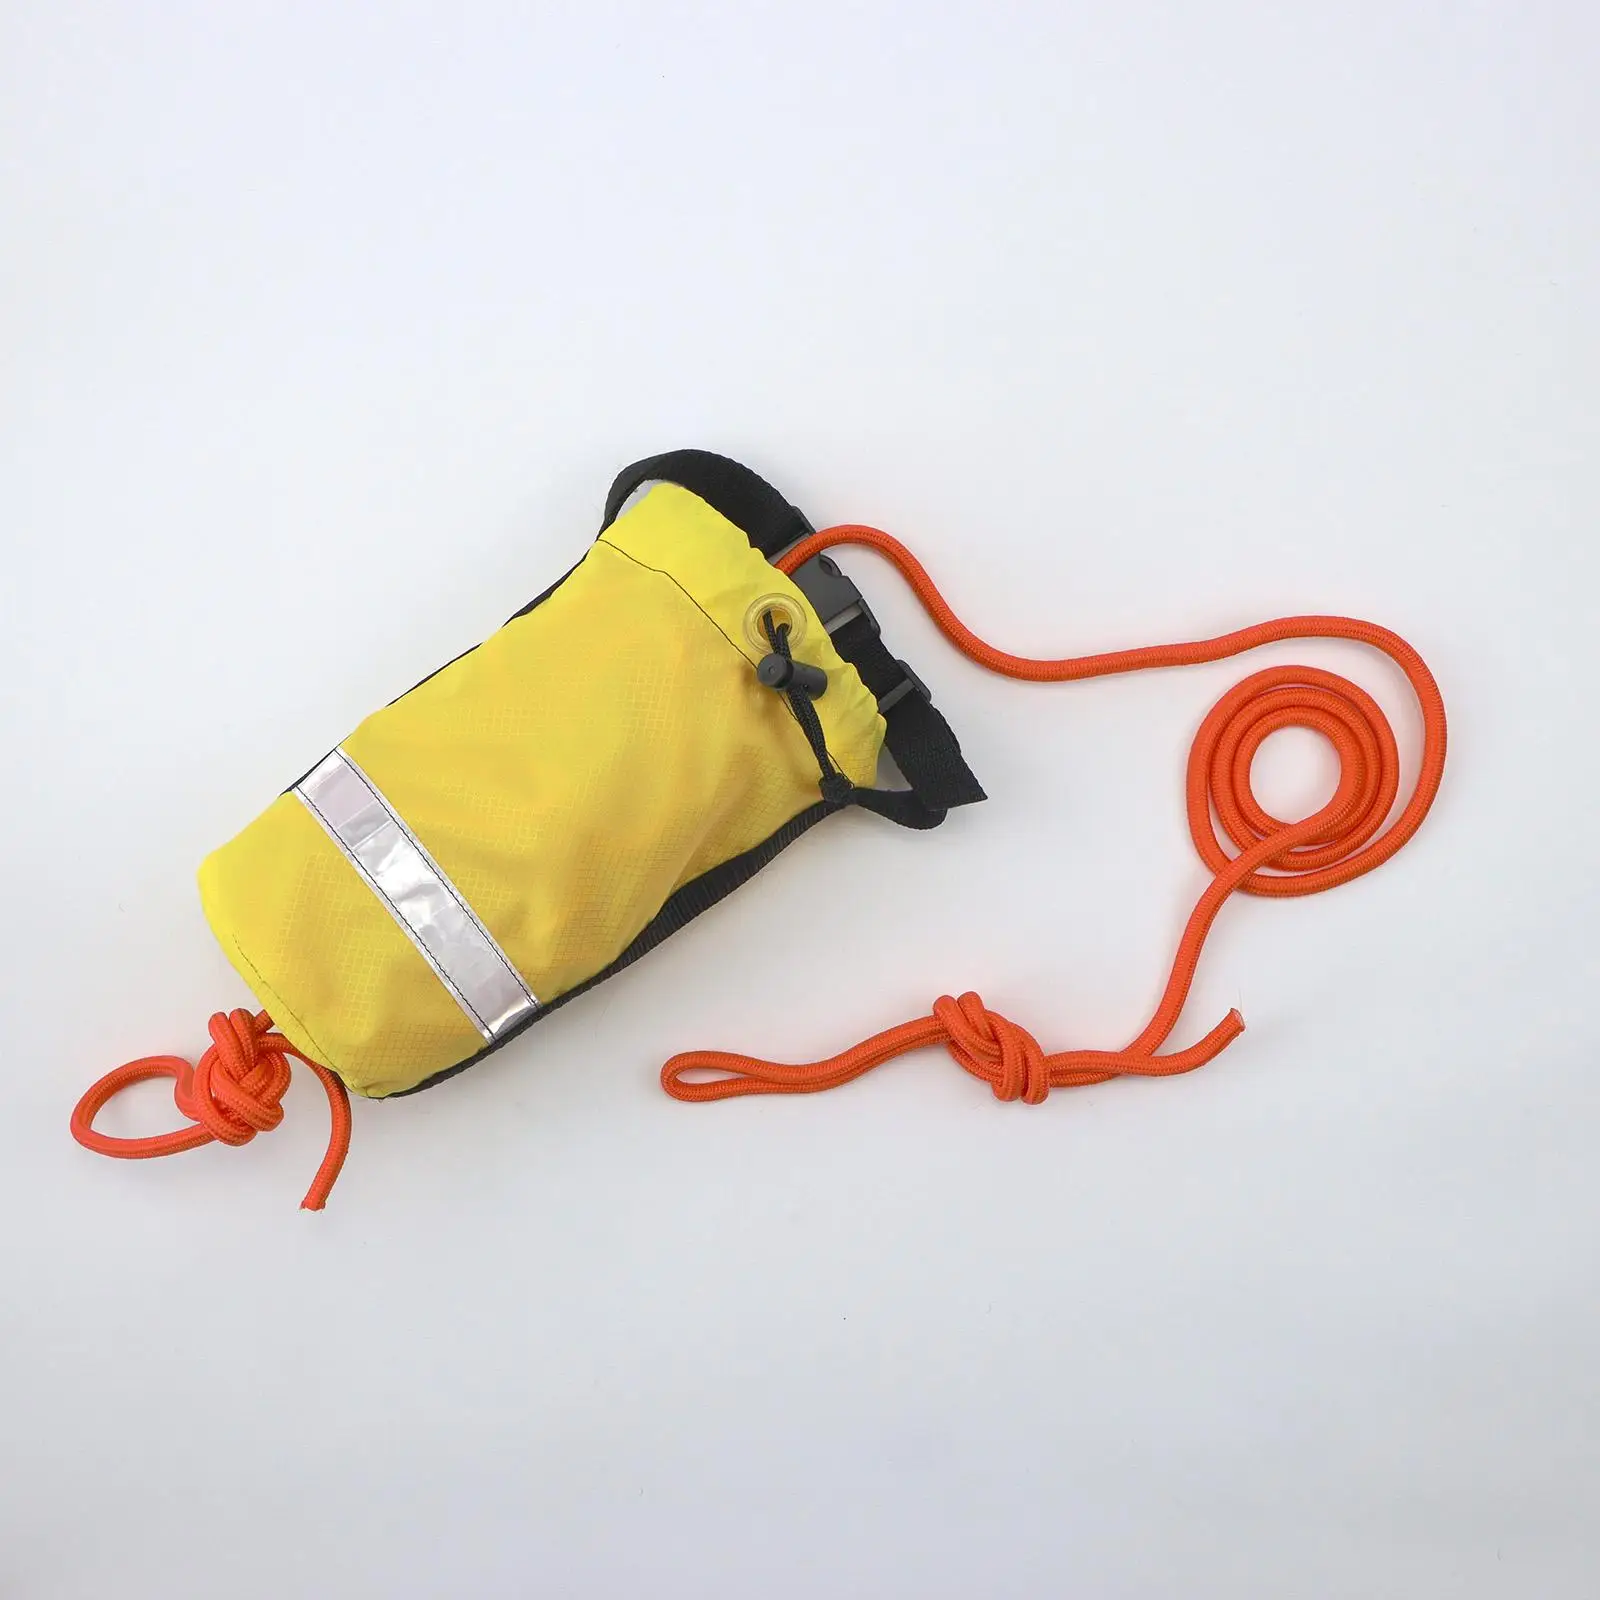 Rescue Throw Bag with 52ft Length of Rope Throw Bag with Rope for Kayaking Water Sports